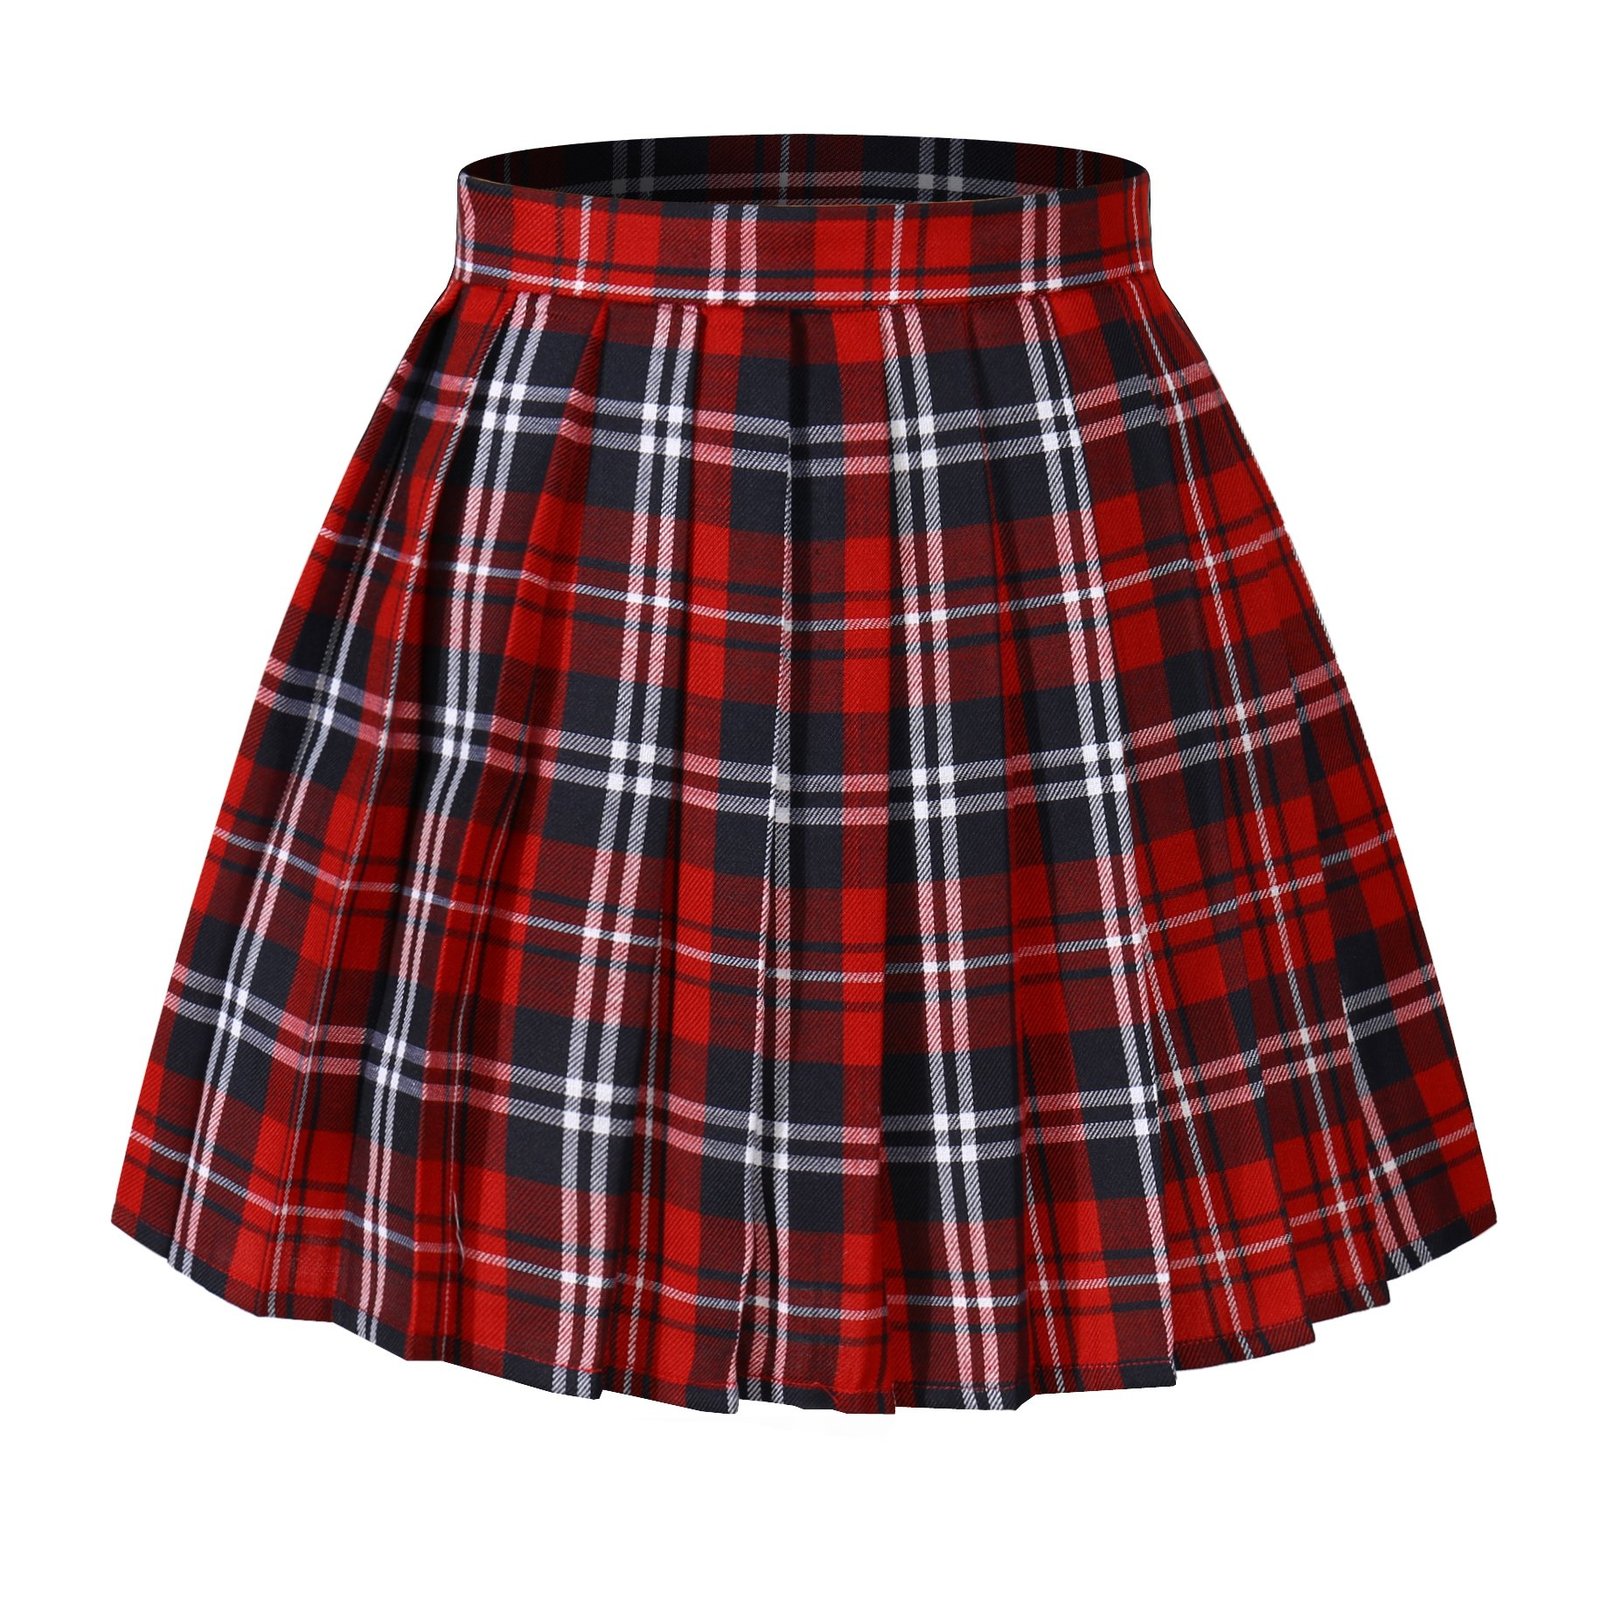 Girl's Japan School A-line Kilt Plaid Pleated Sexy cosplay Skirts (S,Red blue )